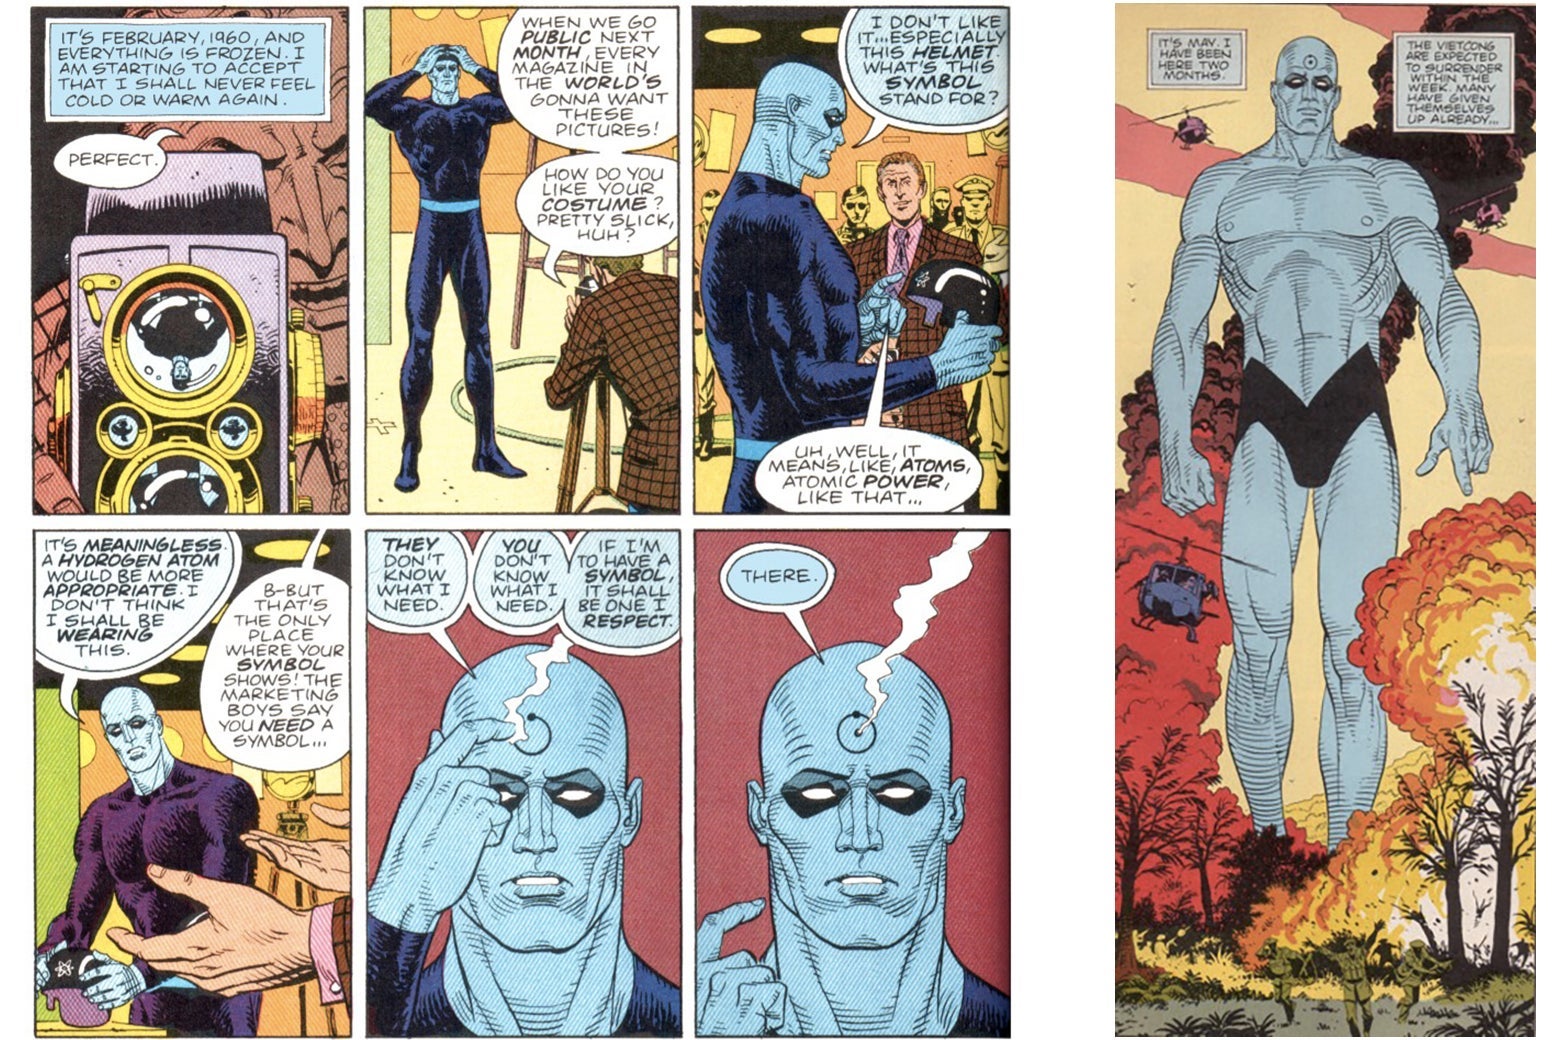 Two excerpts from Watchmen. In the left, Dr. Manhattan is wearing a full-body superhero outfit; in the right, he is wearing a bizarre, v-shaped pair of underwear.